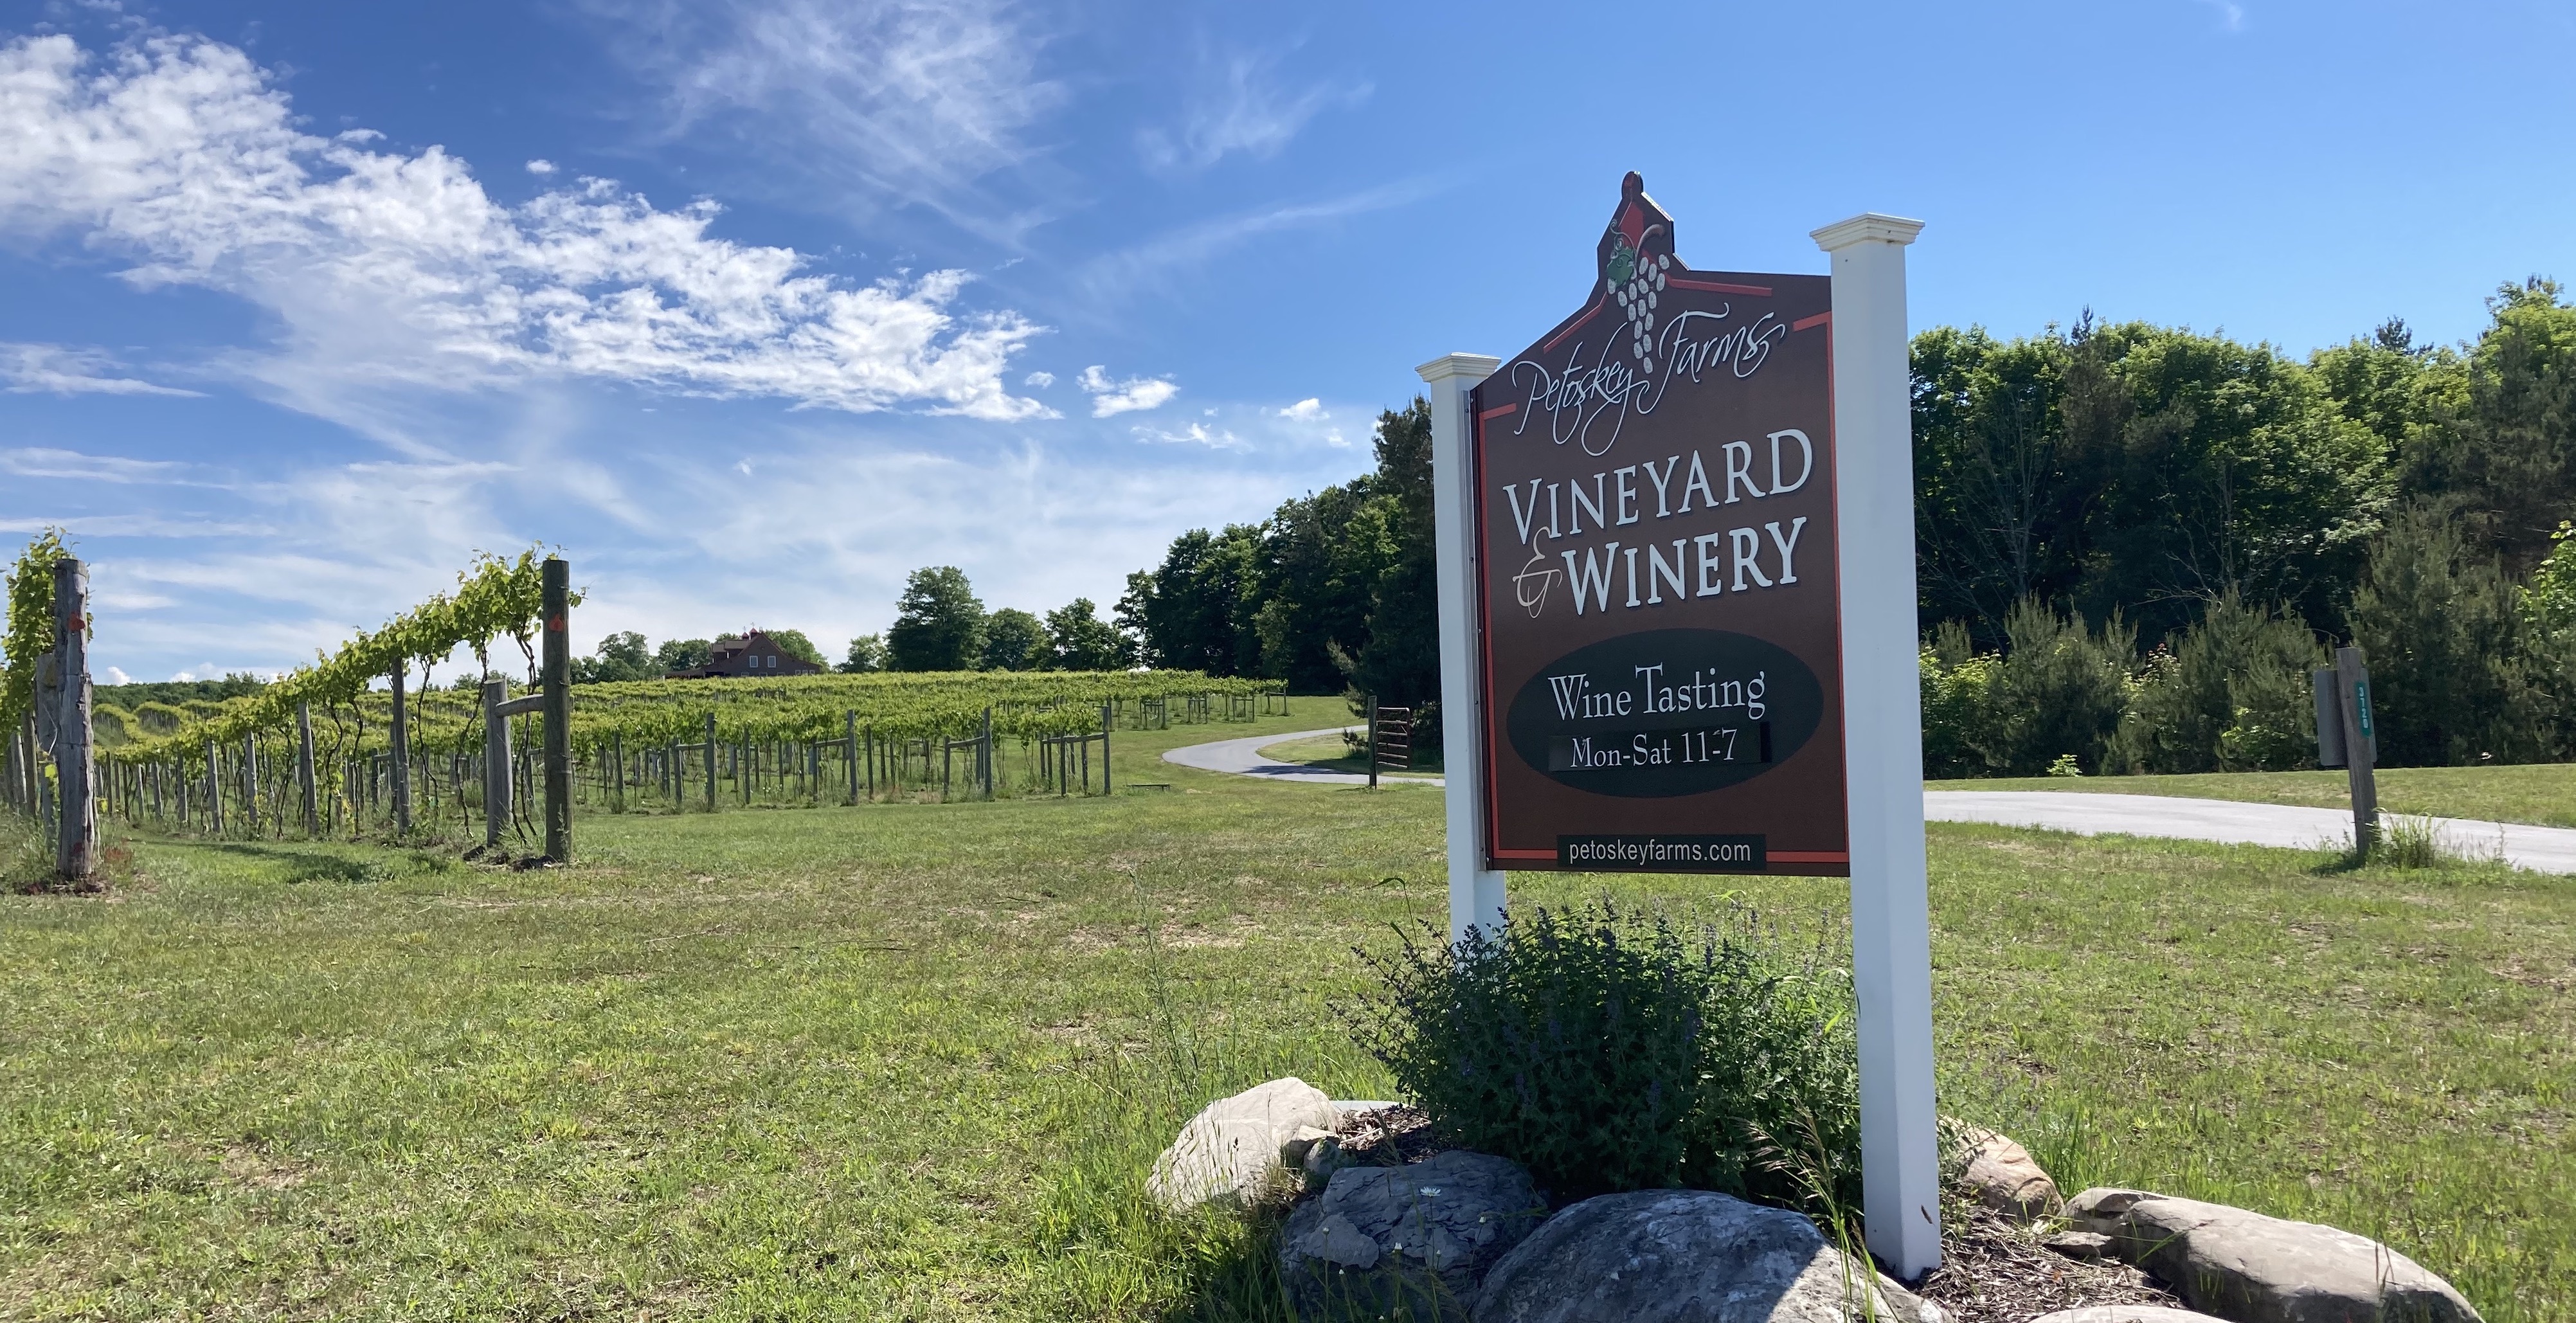 The roadside winery sign with the vineyard in the background.